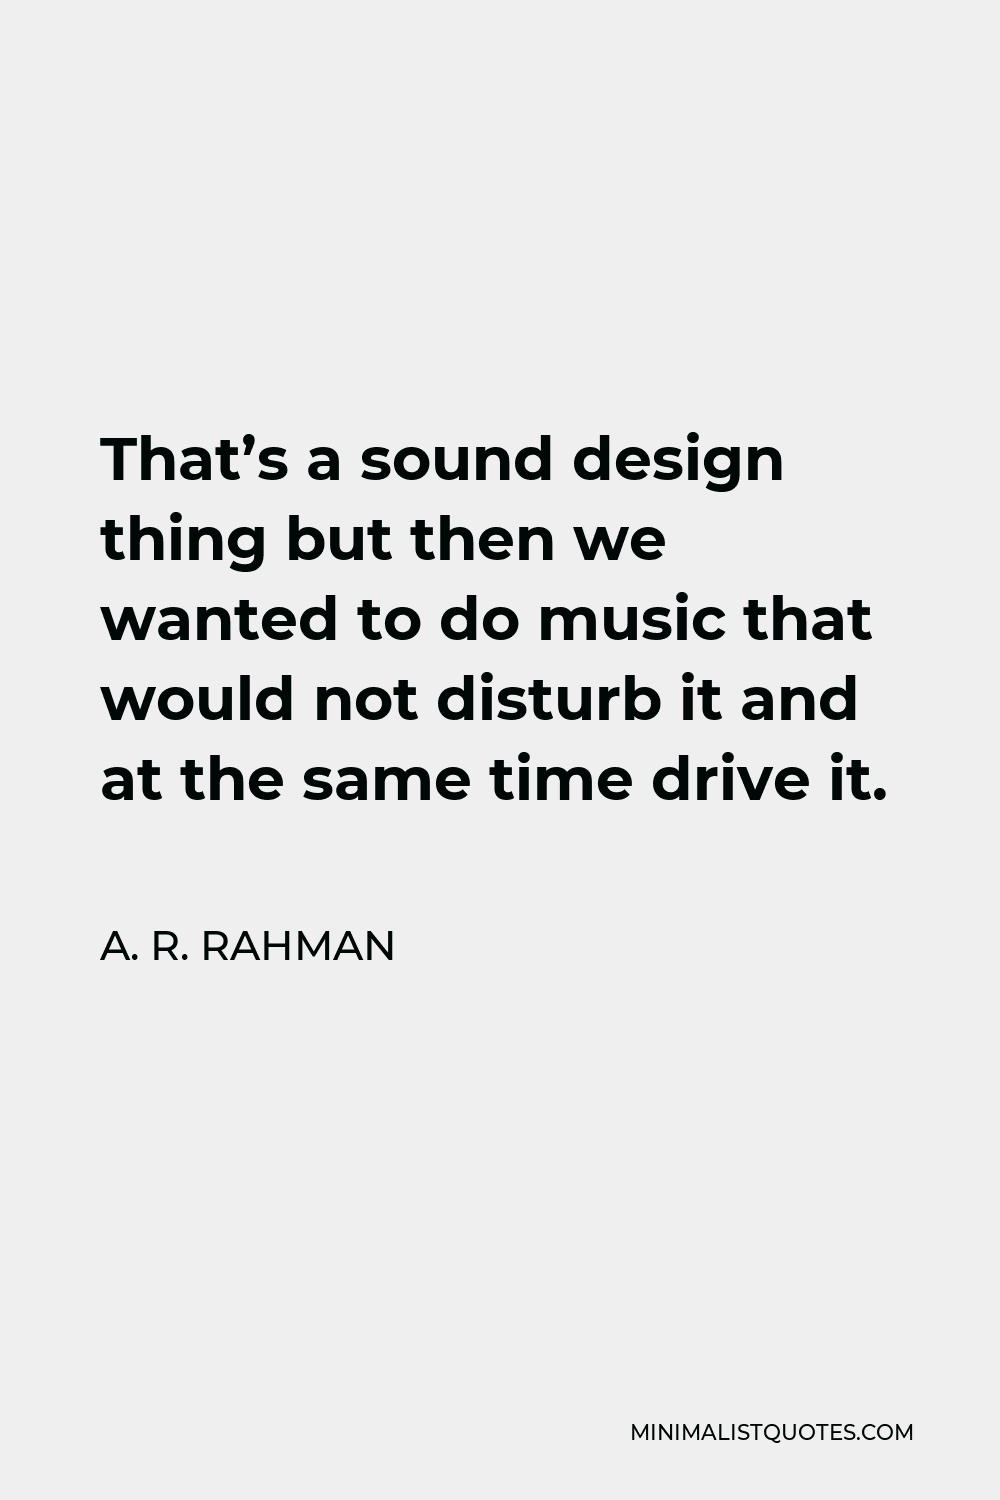 A. R. Rahman Quote - That’s a sound design thing but then we wanted to do music that would not disturb it and at the same time drive it.